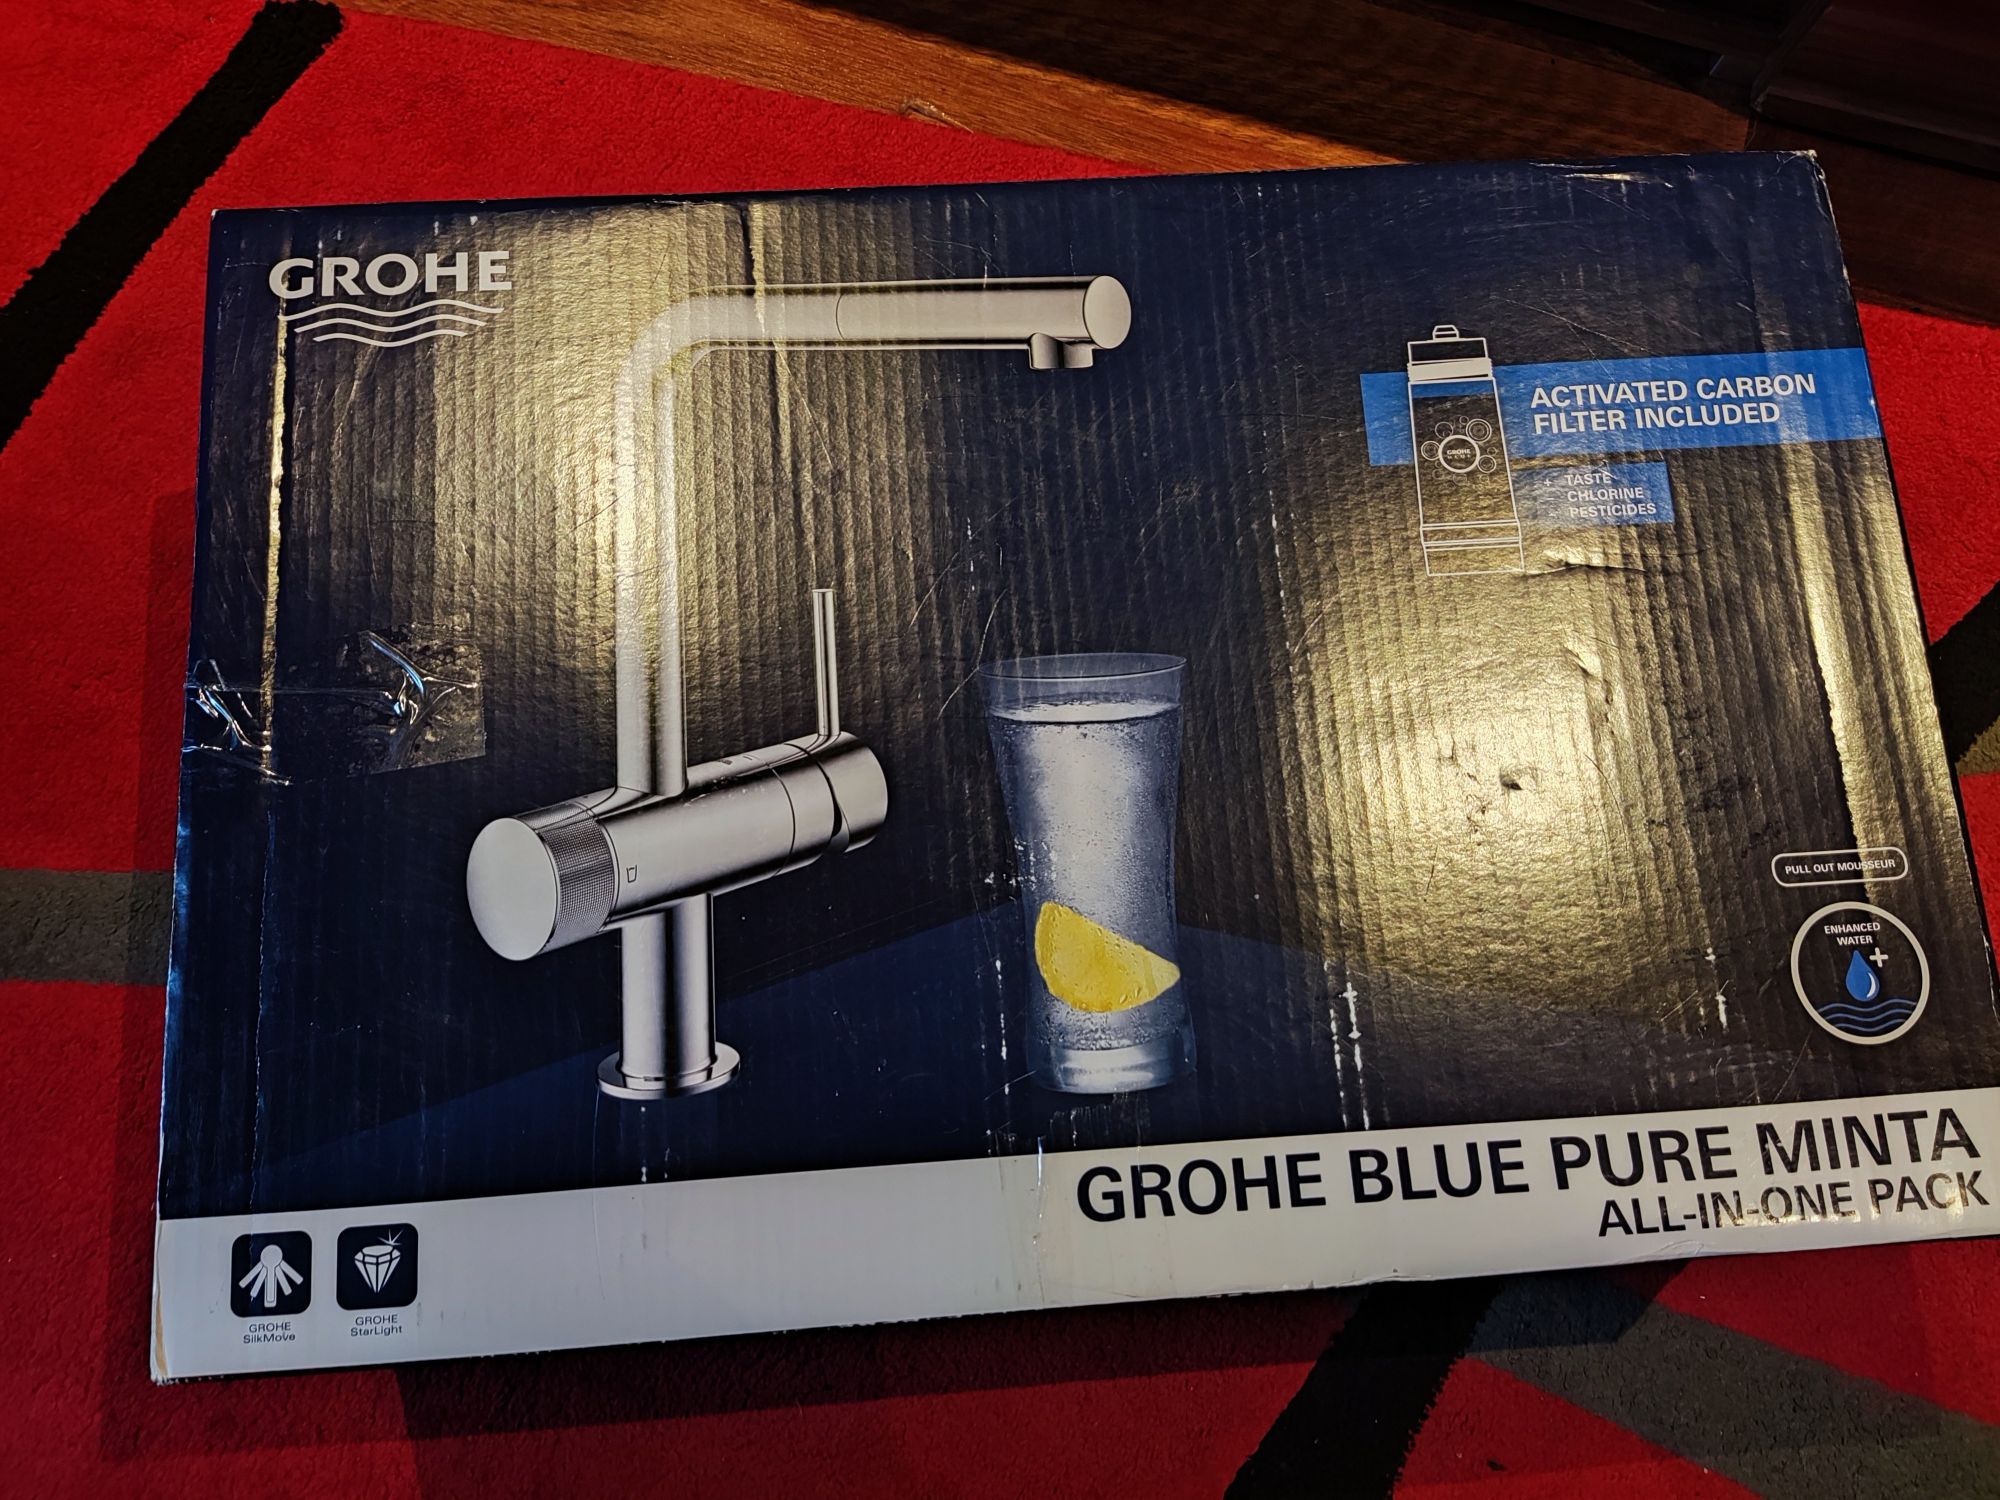 Bateria kuchenna Grohe blue pure minta all in one pack zestaw startowy